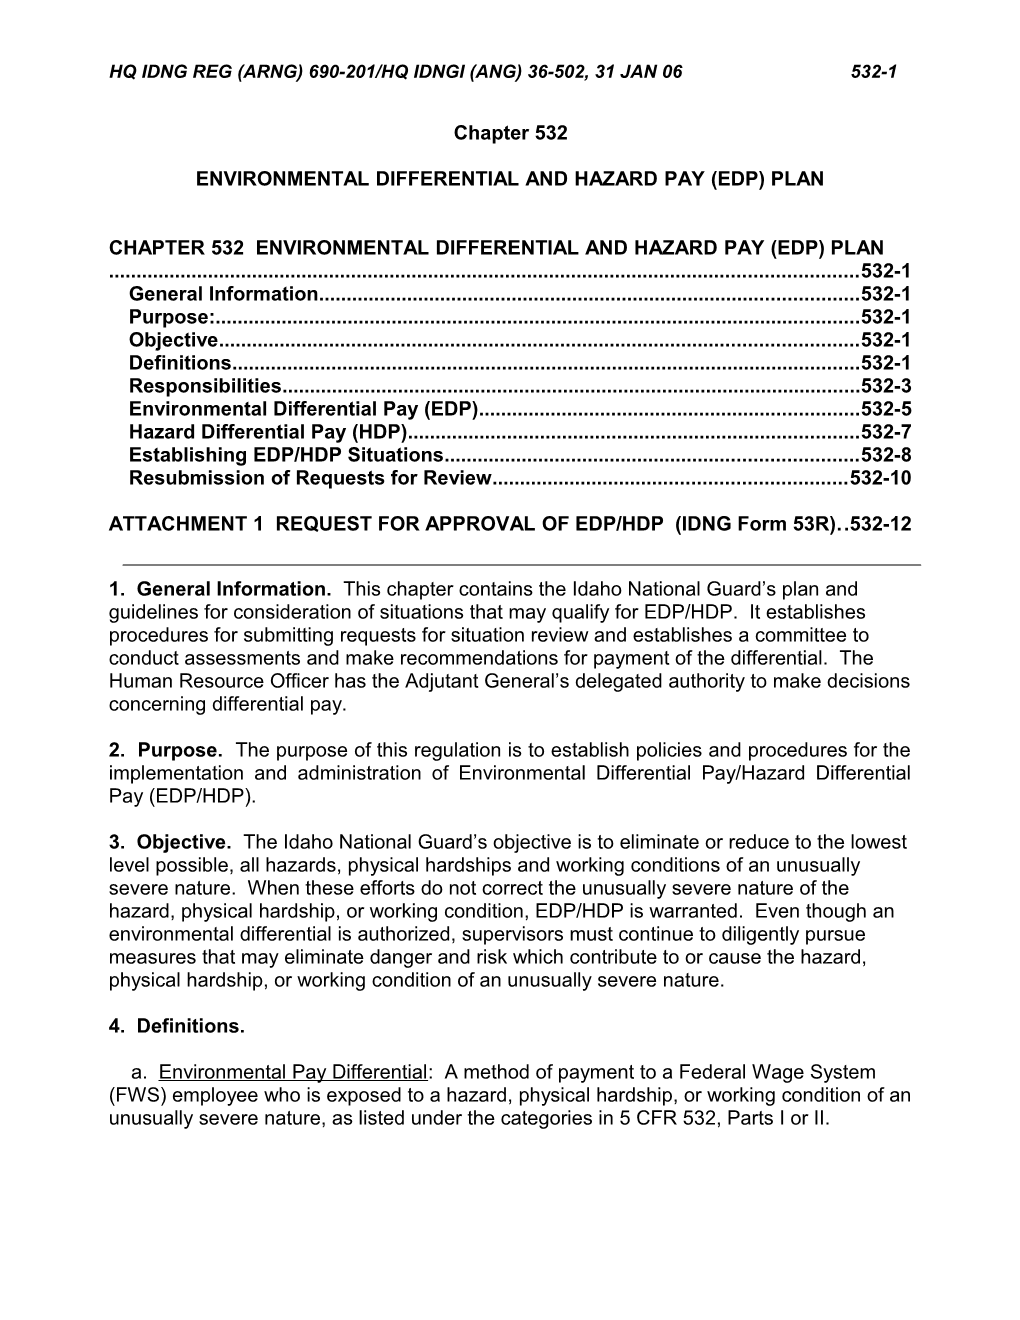 Environmental Differential and Hazard Pay (EDP) Plan